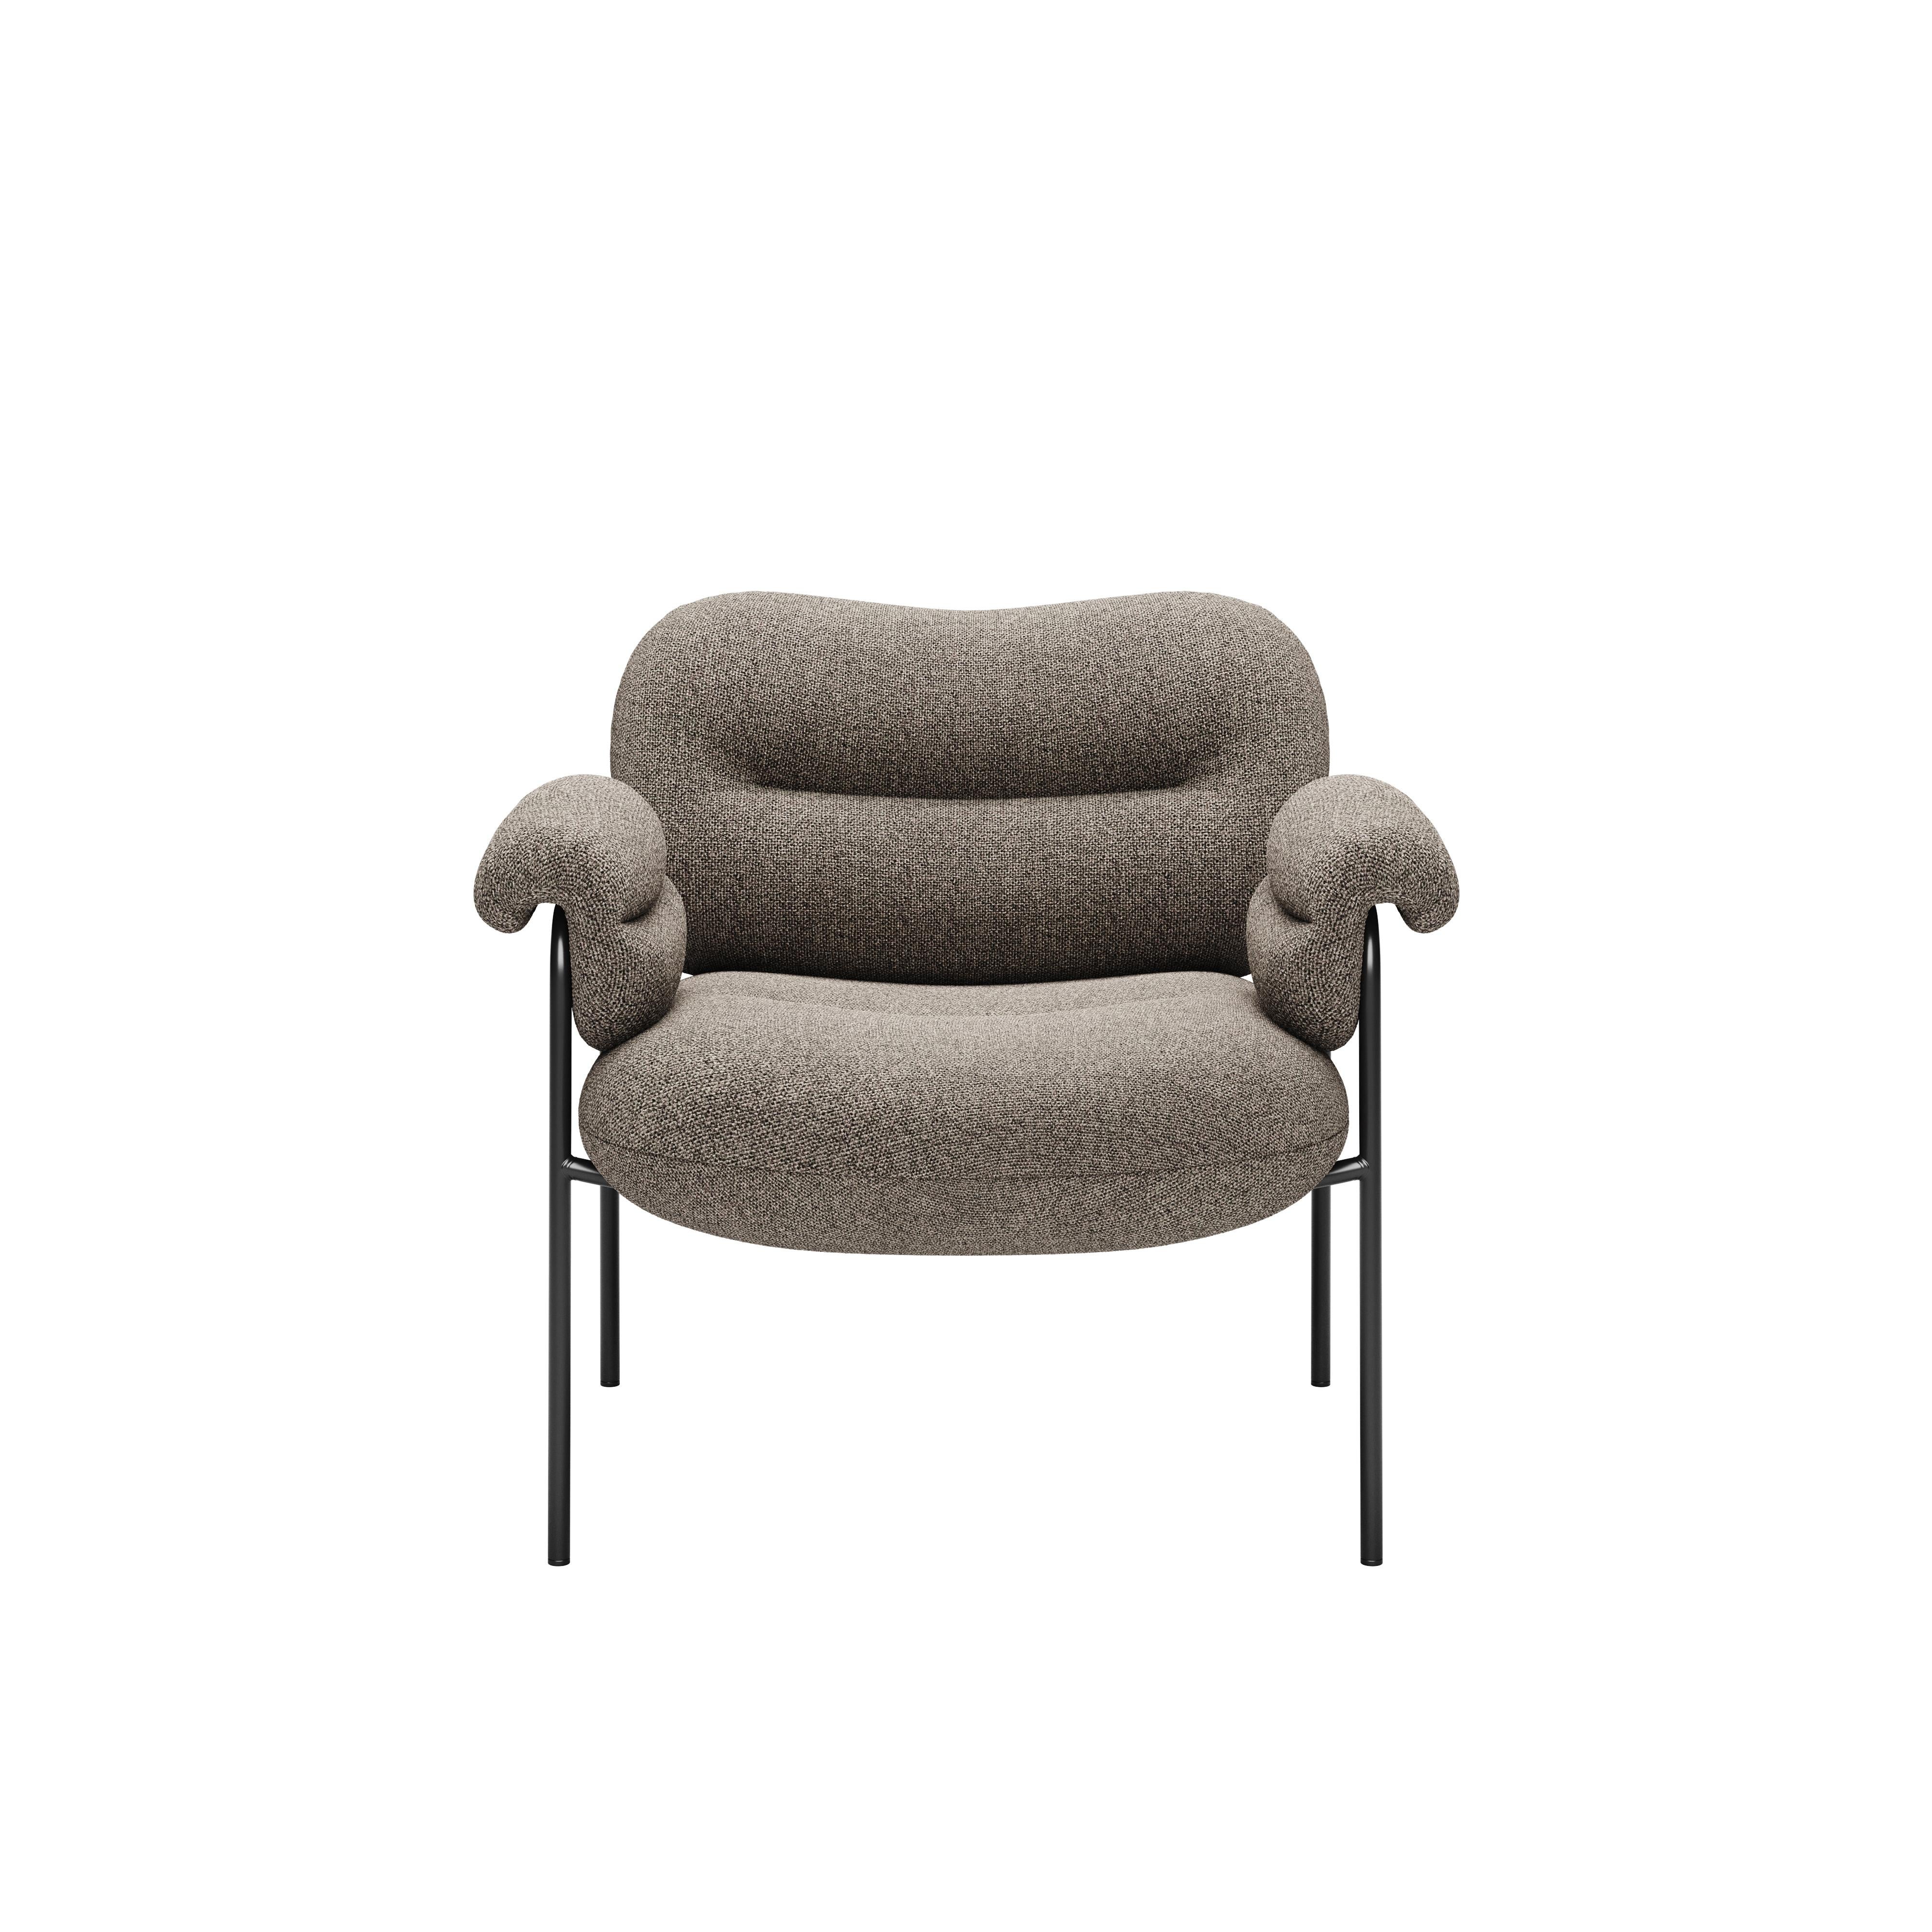 Bollo Armchair by Andreas Engesvik for FOGIA

Model shown on main images: Black steel legs + Fabric: MainlineFlax col.26

Width: 81cm /32in
Depth: 81cm /32in
Height: 71cm /28in
Seat Height: 42.5cm /17in
Seat Depth: 54cm / 21in

The iconic Bollo